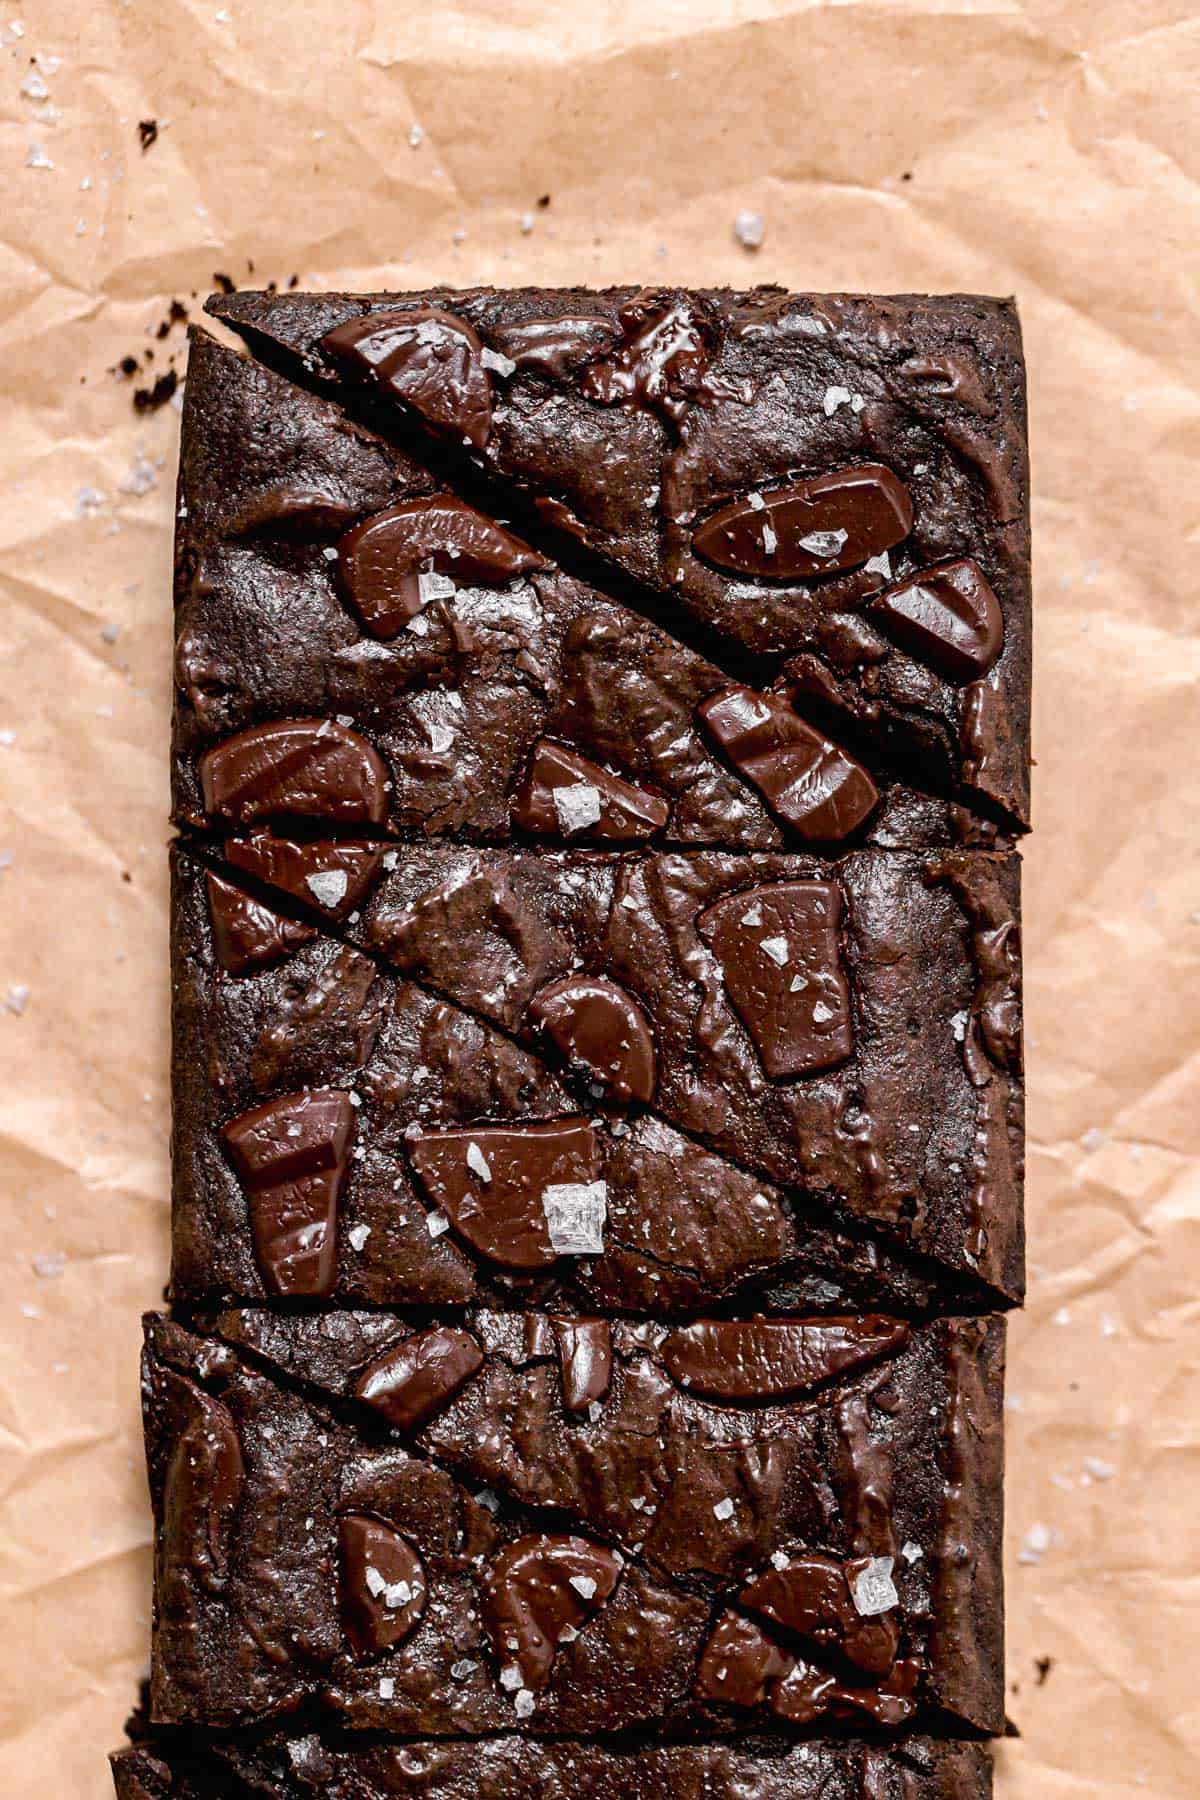 baked brownies cut into triangles.